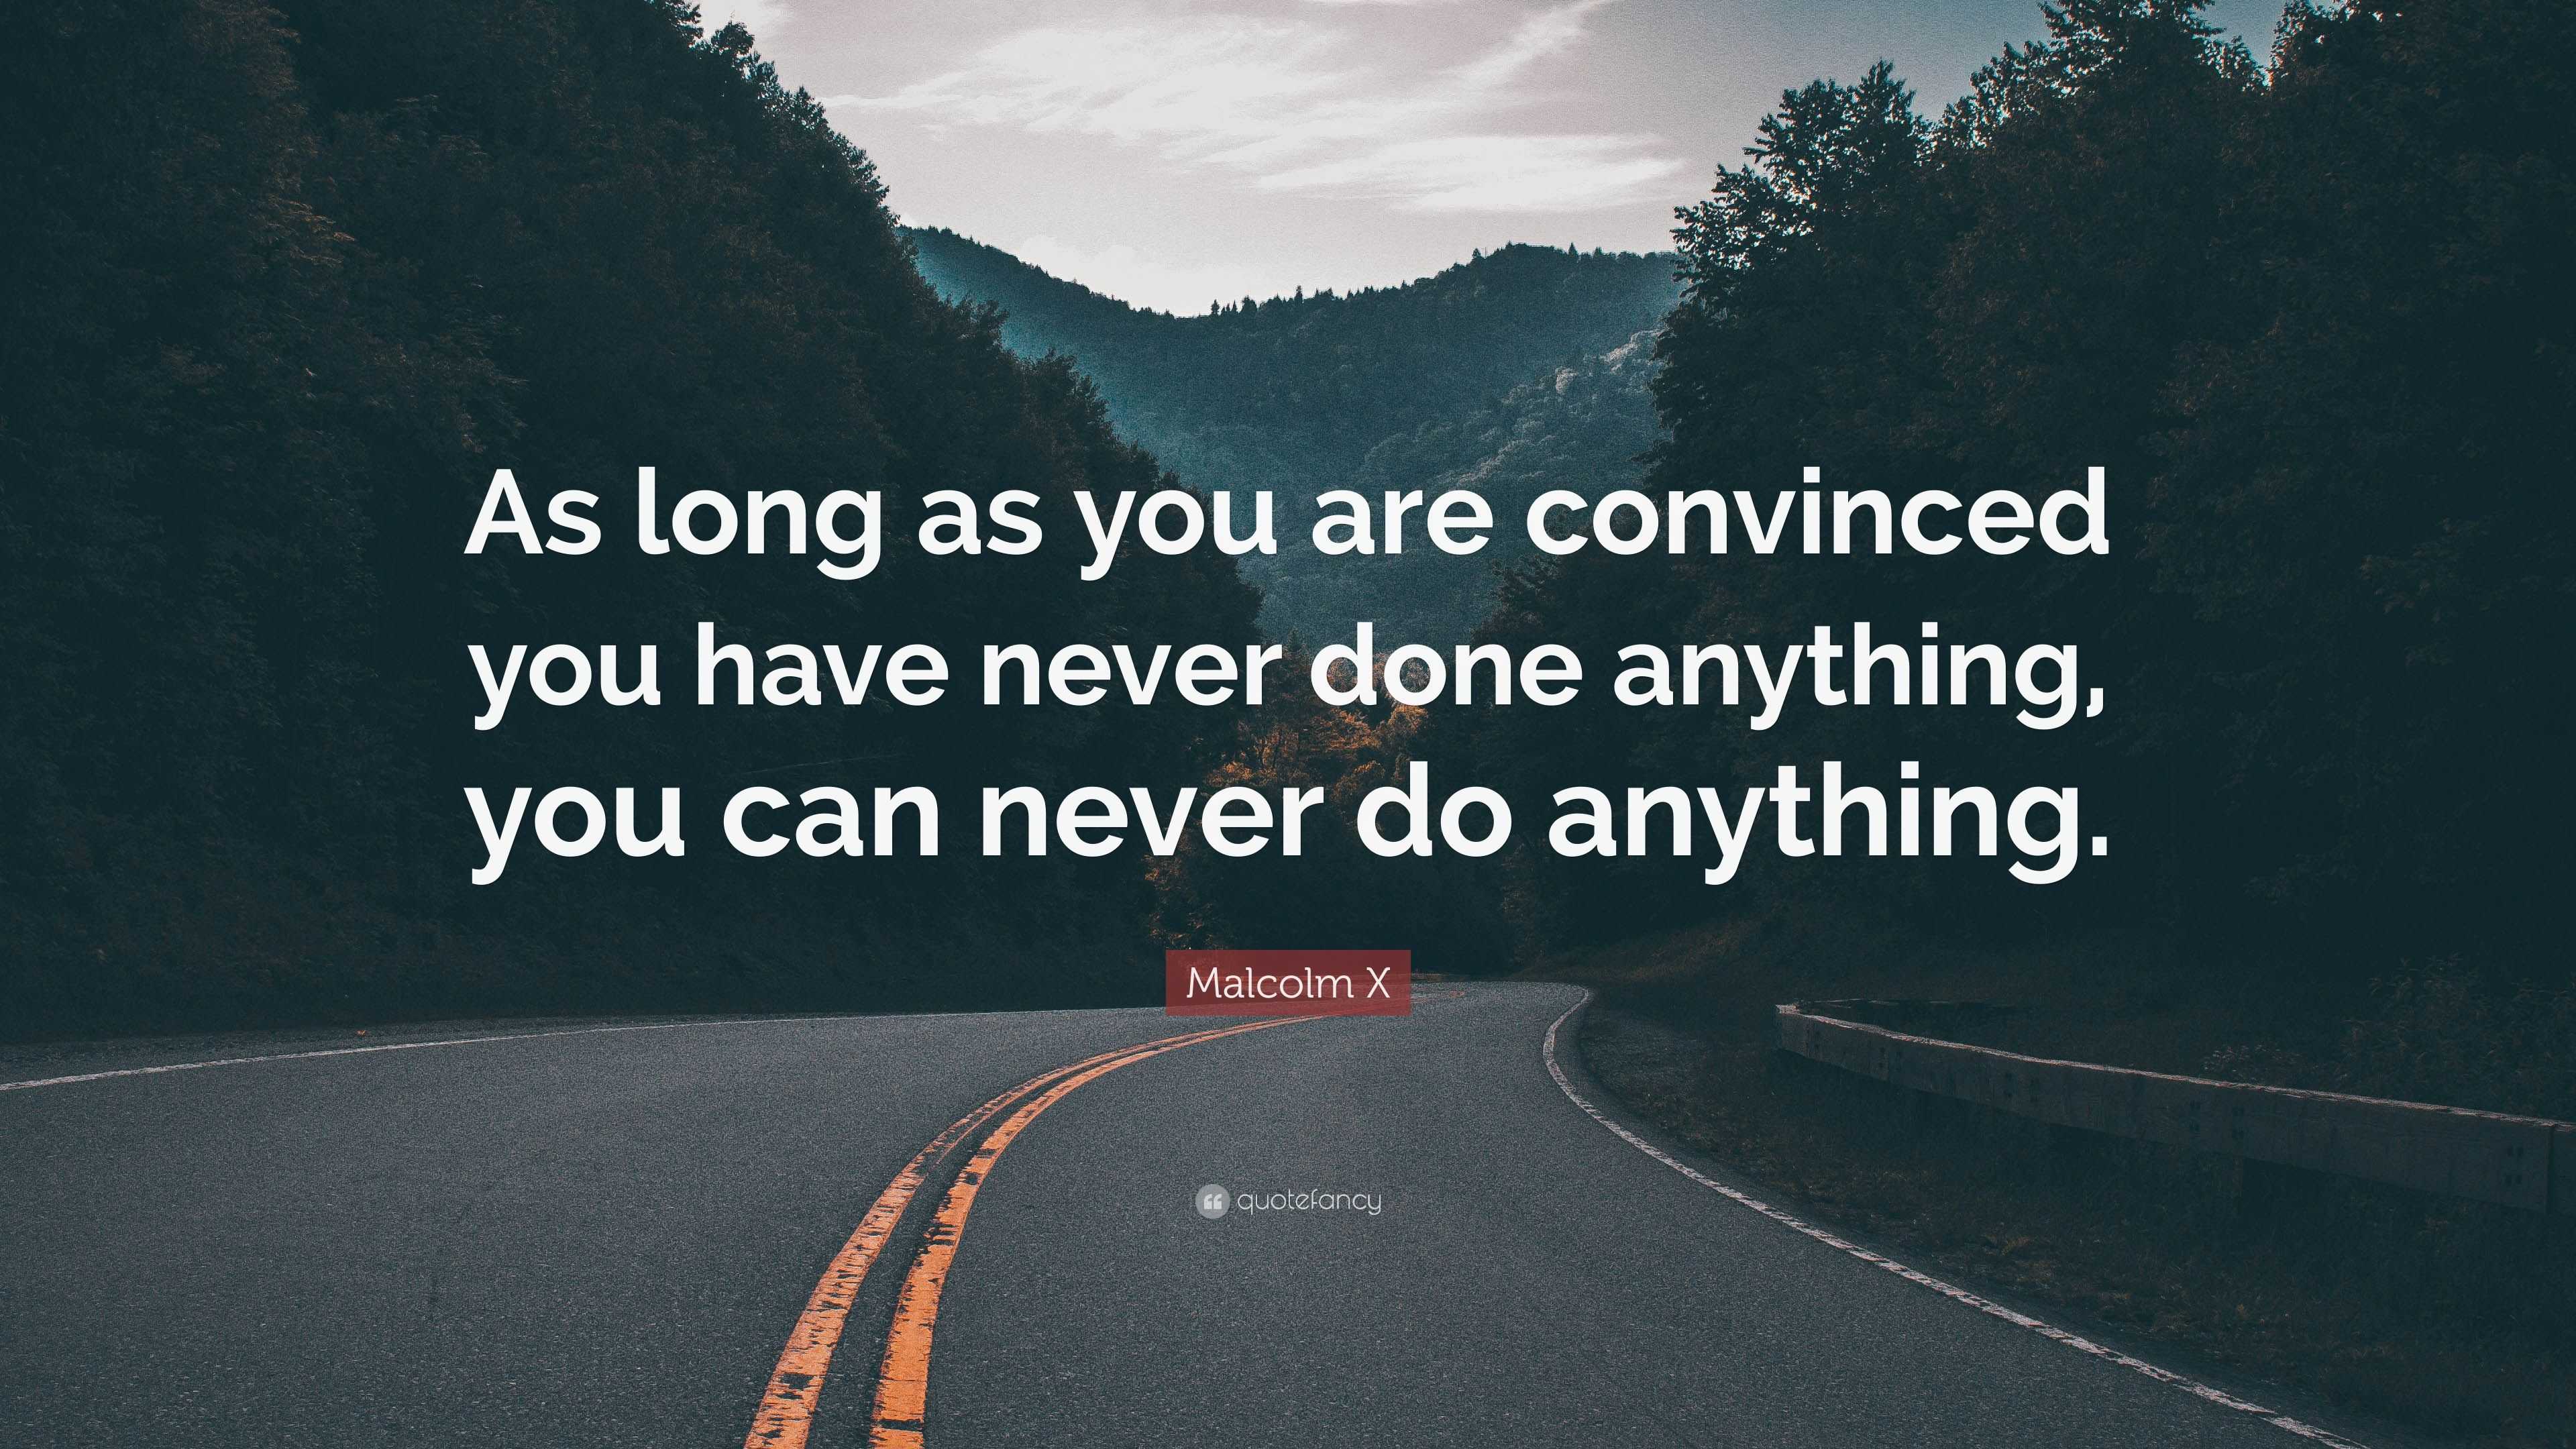 Malcolm X Quote: “As long as you are convinced you have never done ...